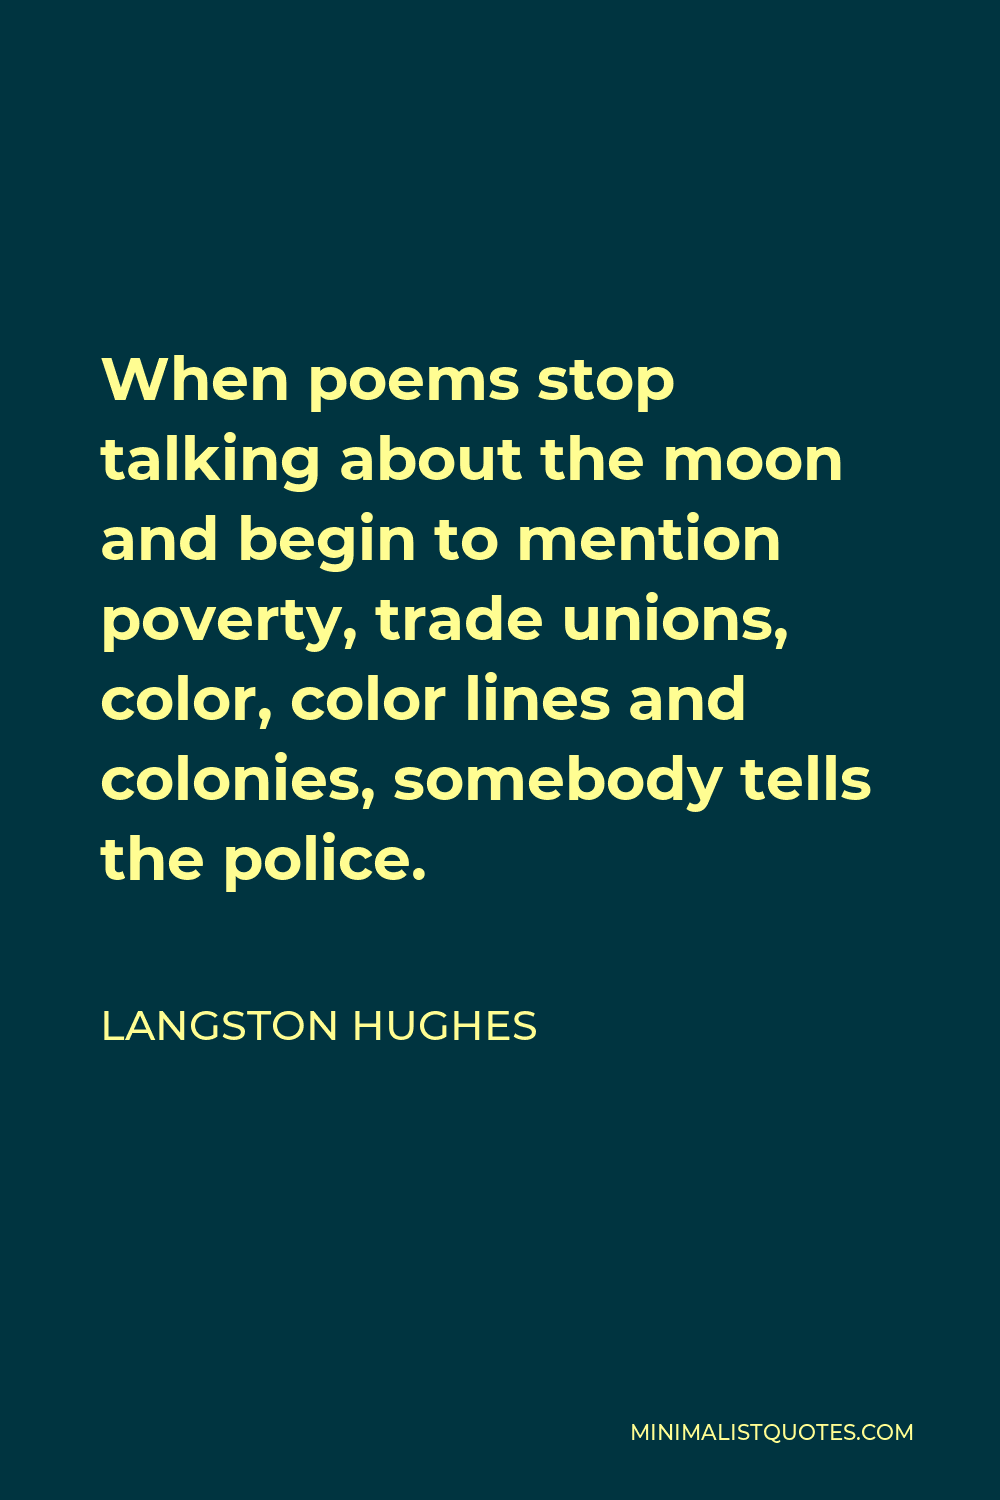 Langston Hughes Quote - When poems stop talking about the moon and begin to mention poverty, trade unions, color, color lines and colonies, somebody tells the police.